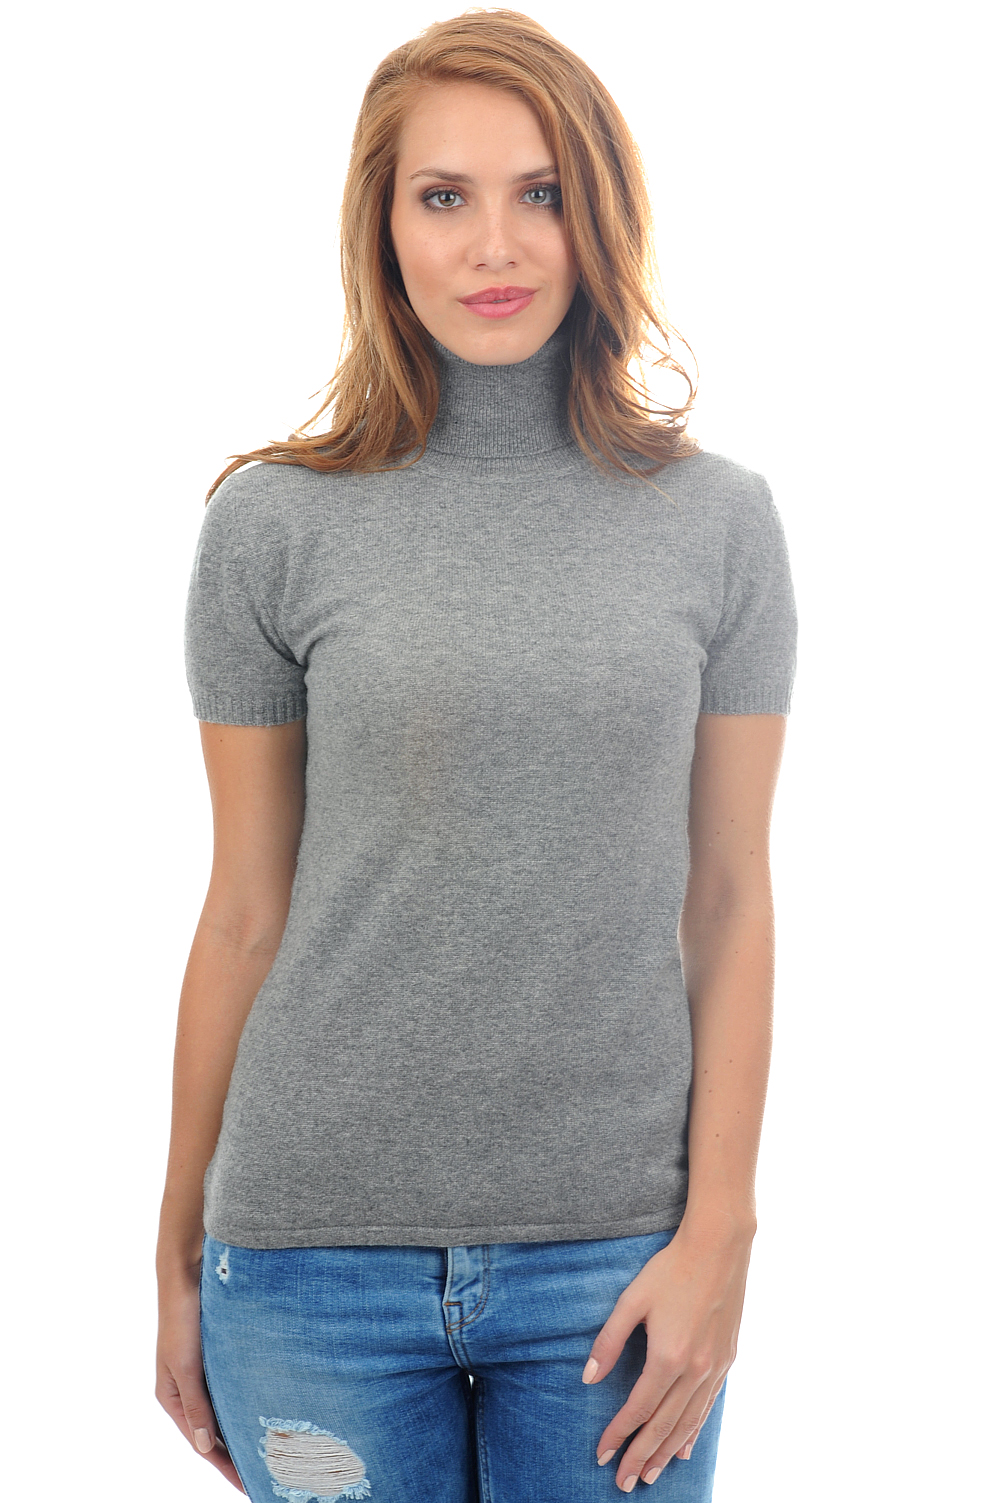 Cachemire pull femme col roule olivia gris chine 3xl